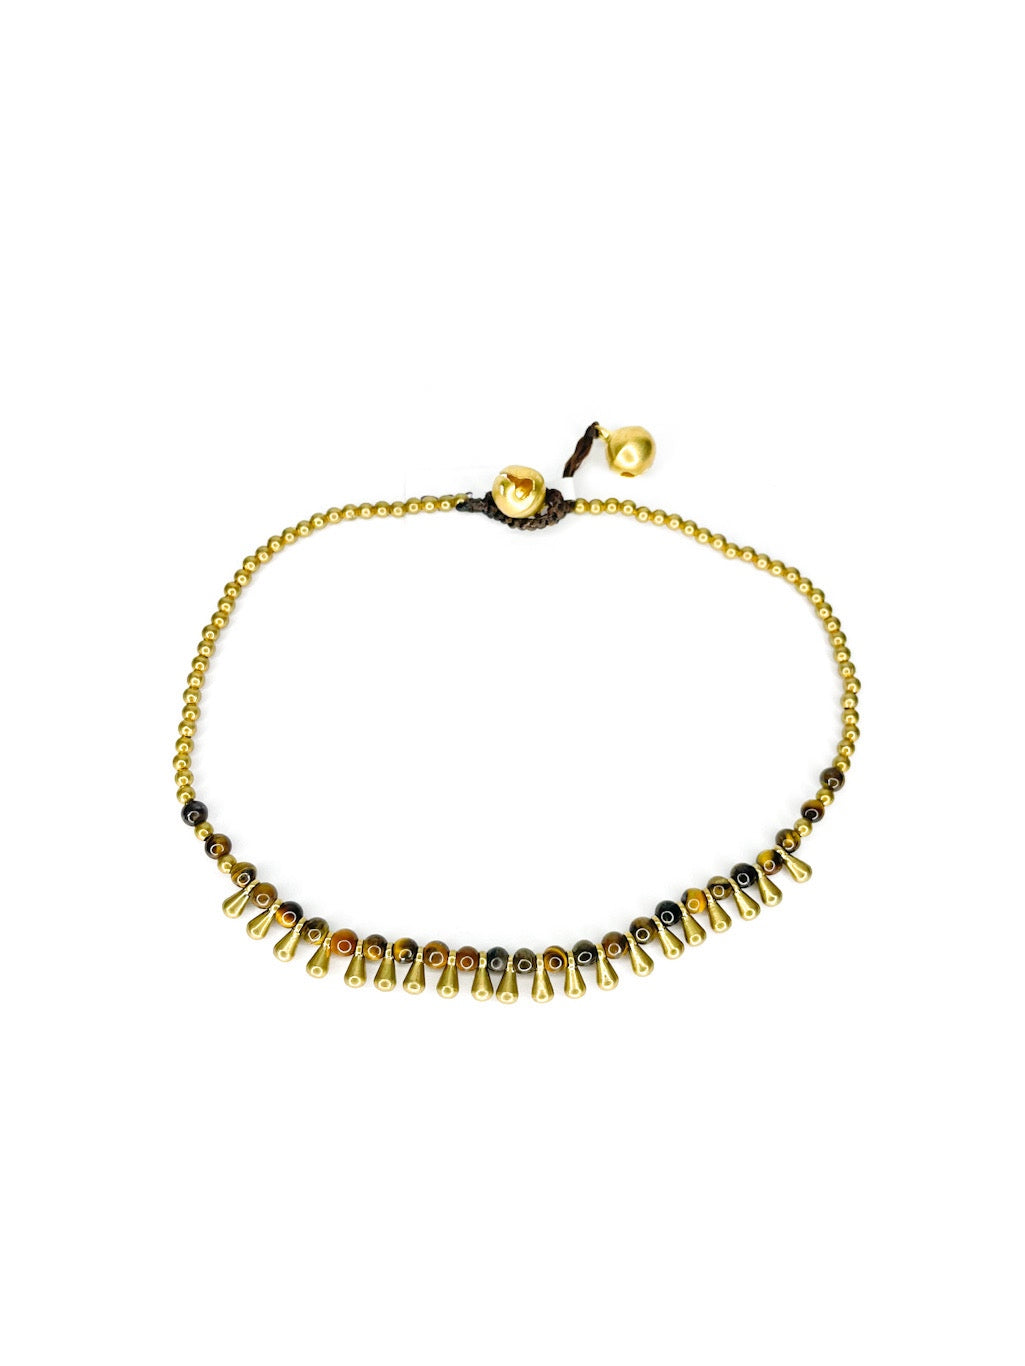 Stone and raindrop brass beaded anklet - various colours